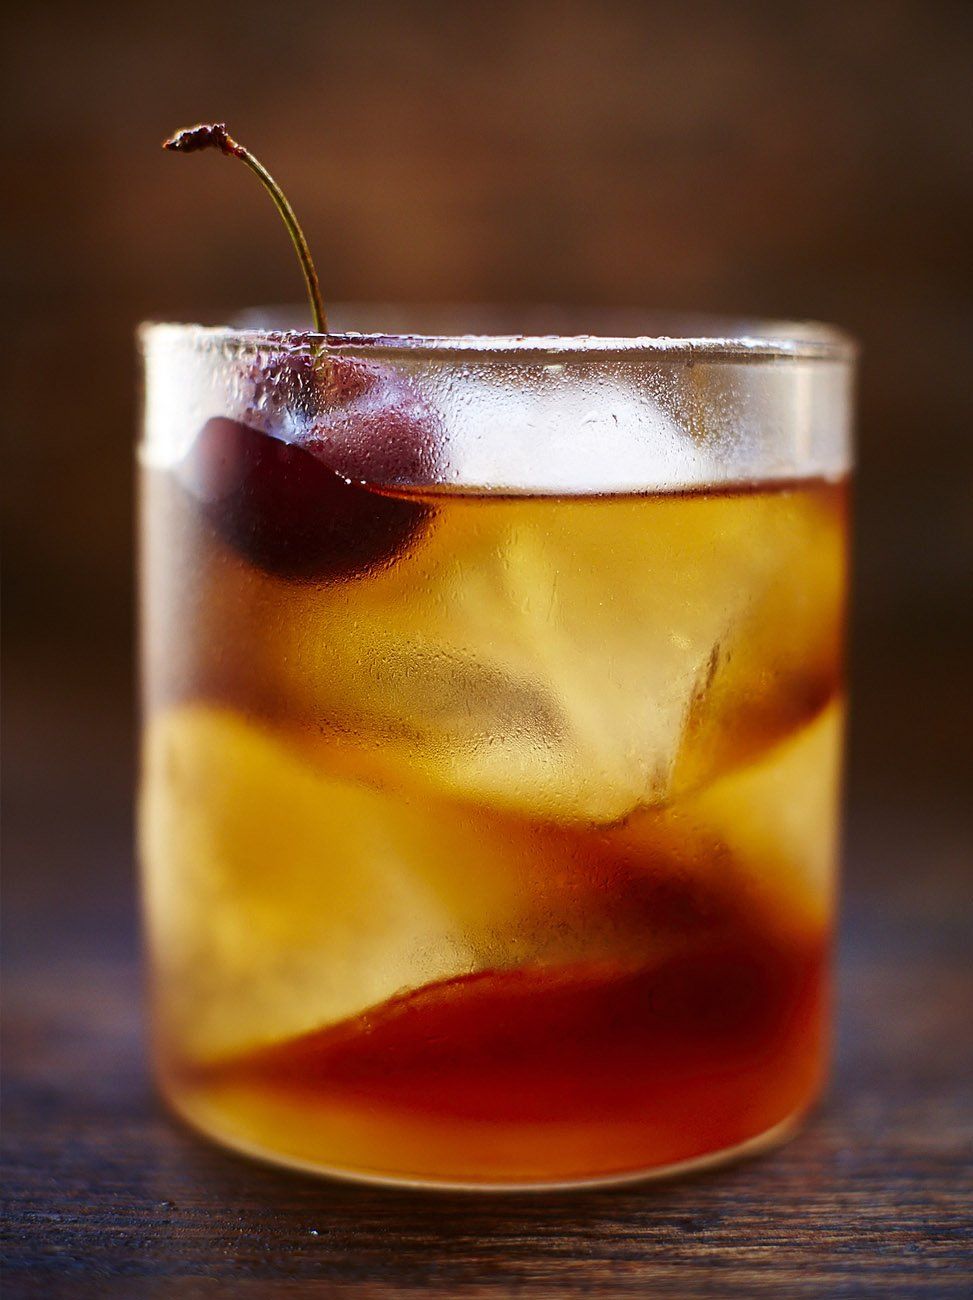 Rum old fashioned